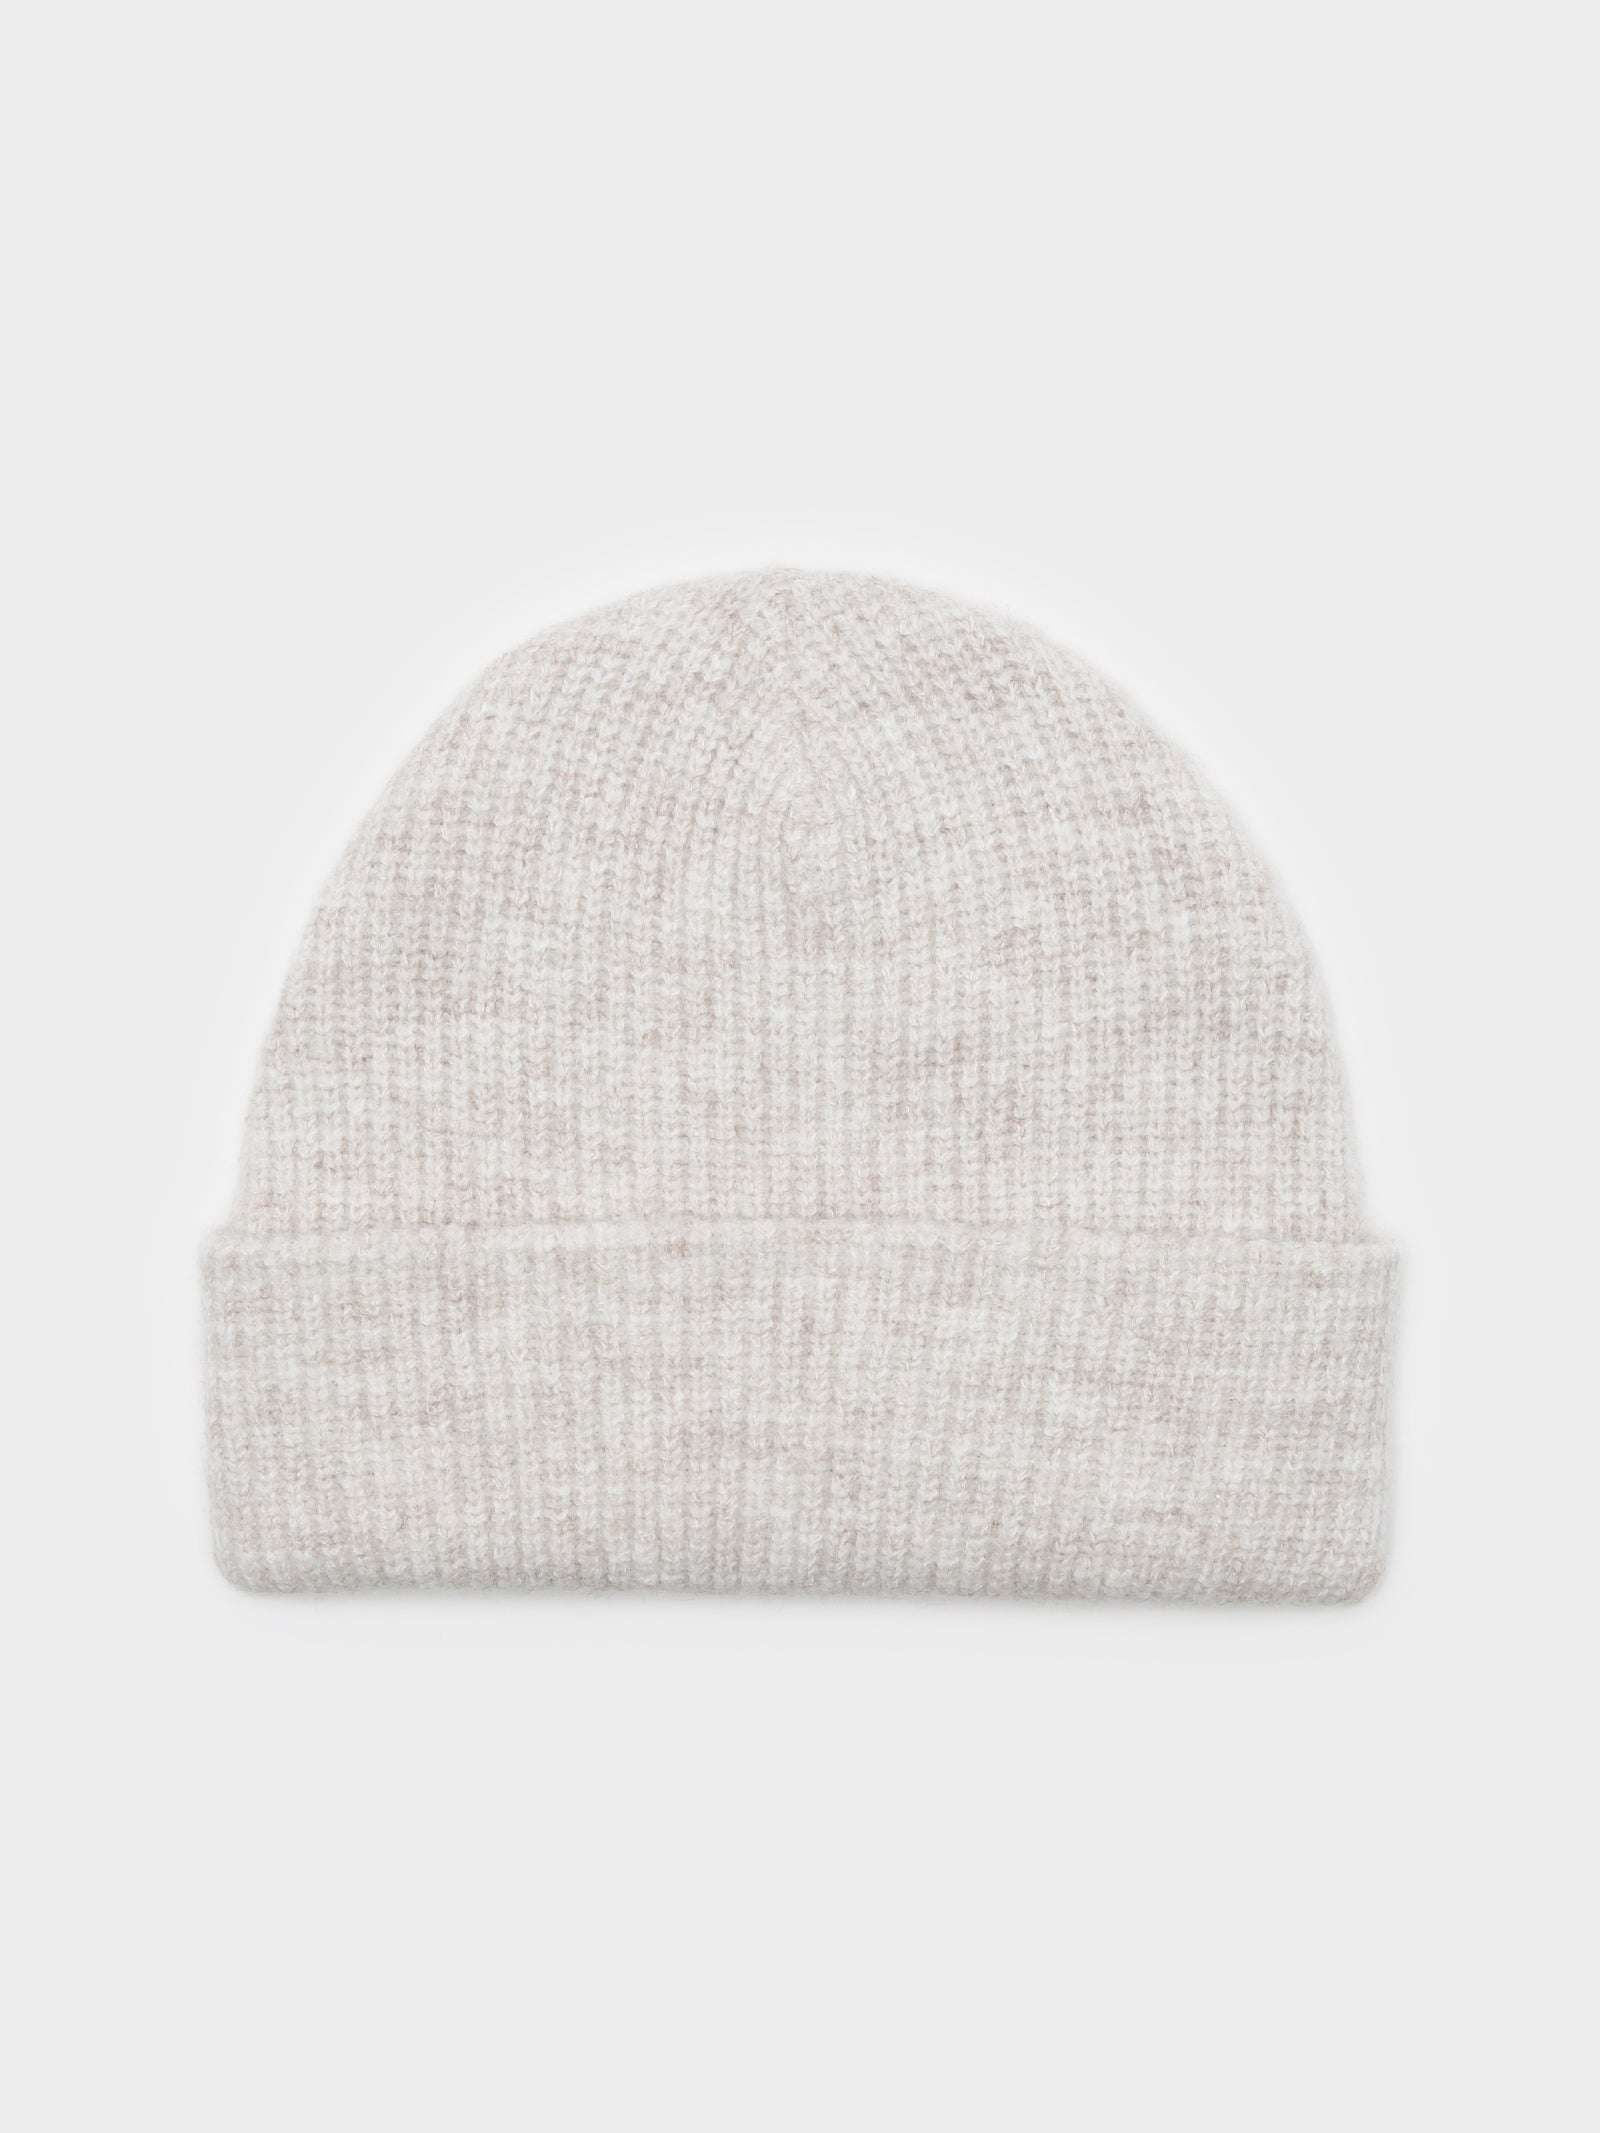 Beyond Beanie in Natural Grey